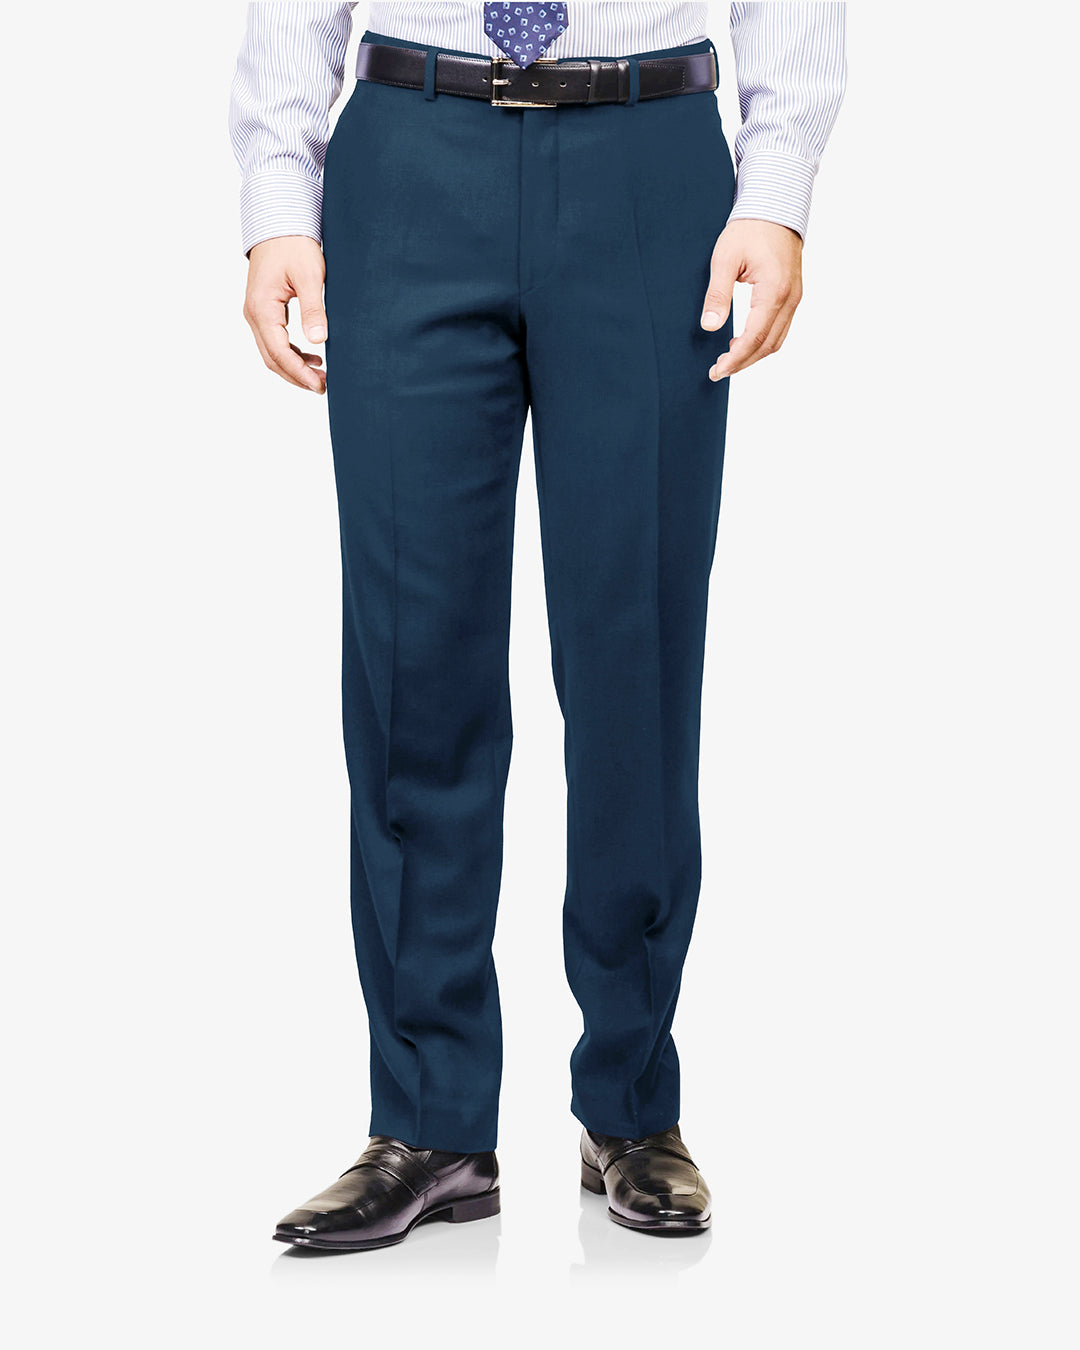 Navy Twill Stretchable chino